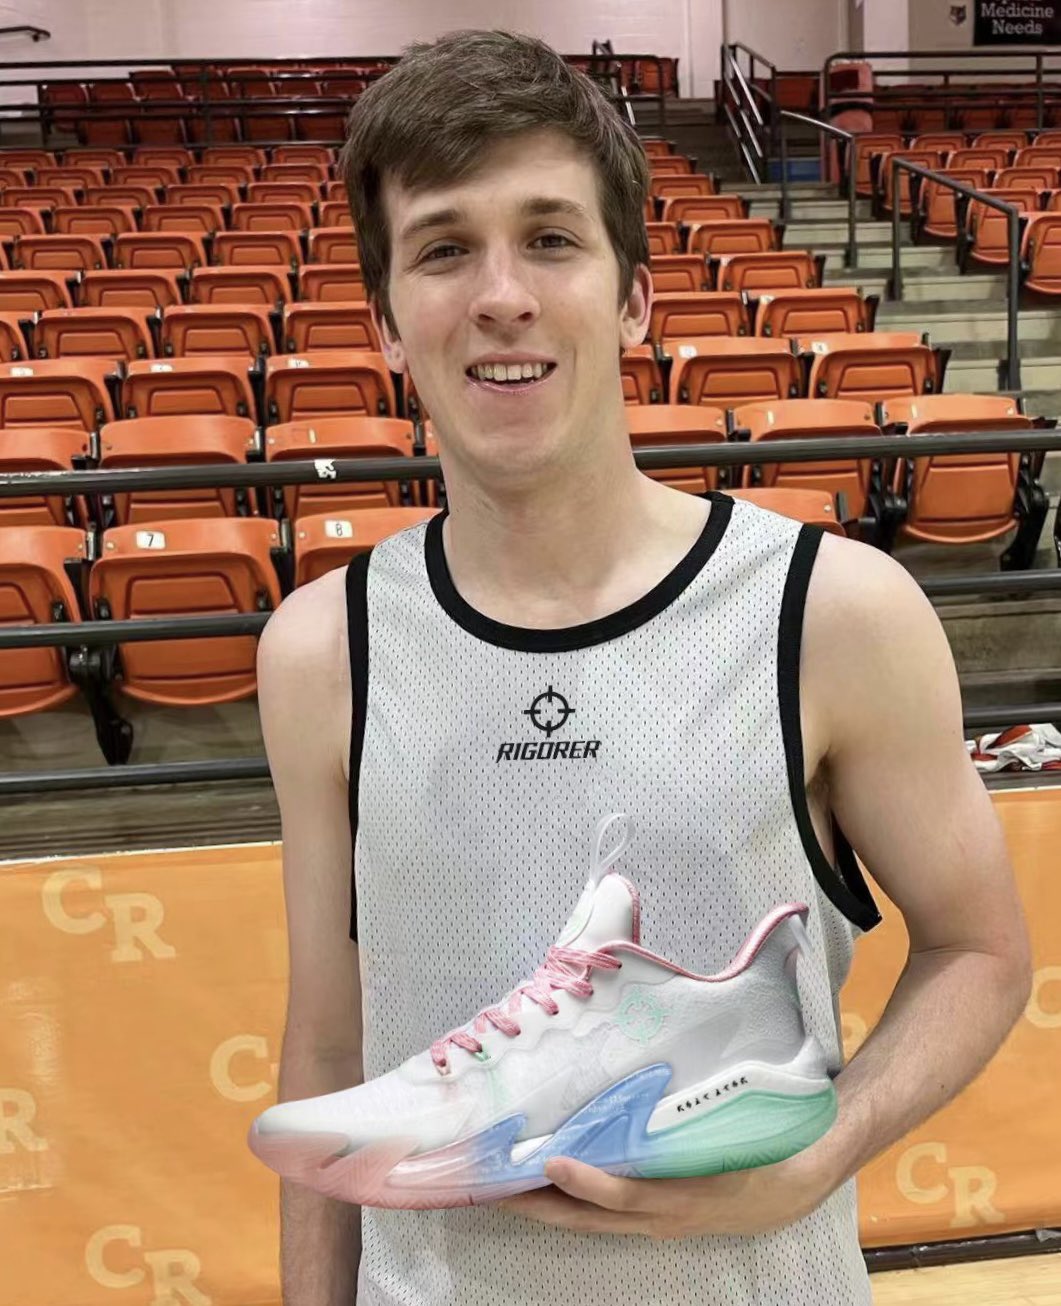 Austin Reaves is getting signature shoe with Chinese brand